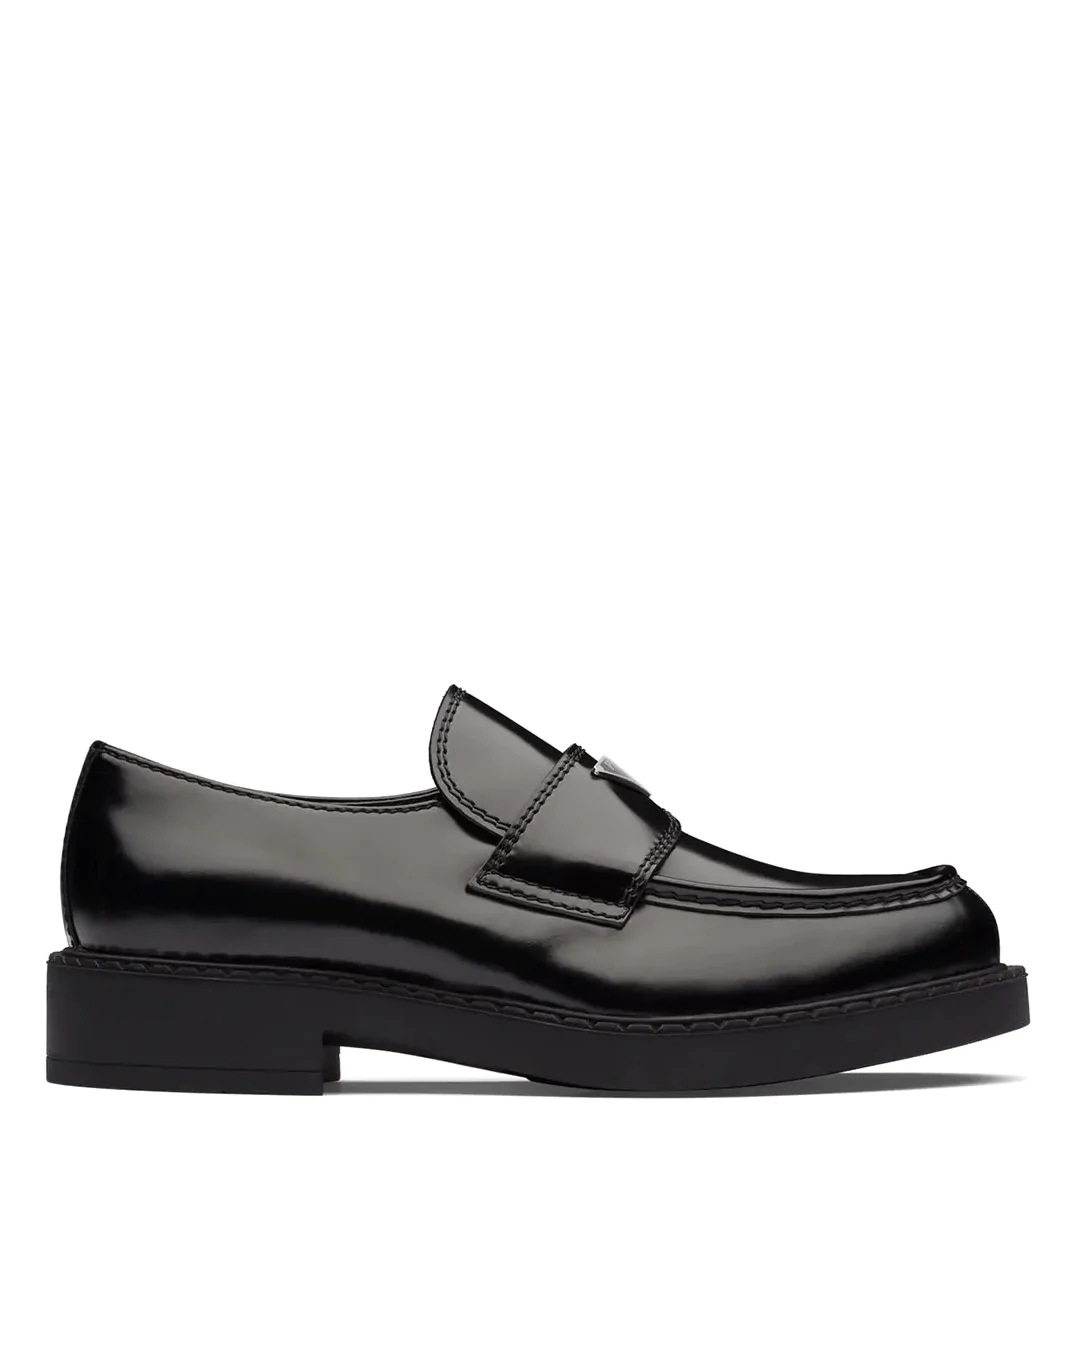 Prada Brushed Leather Loafers